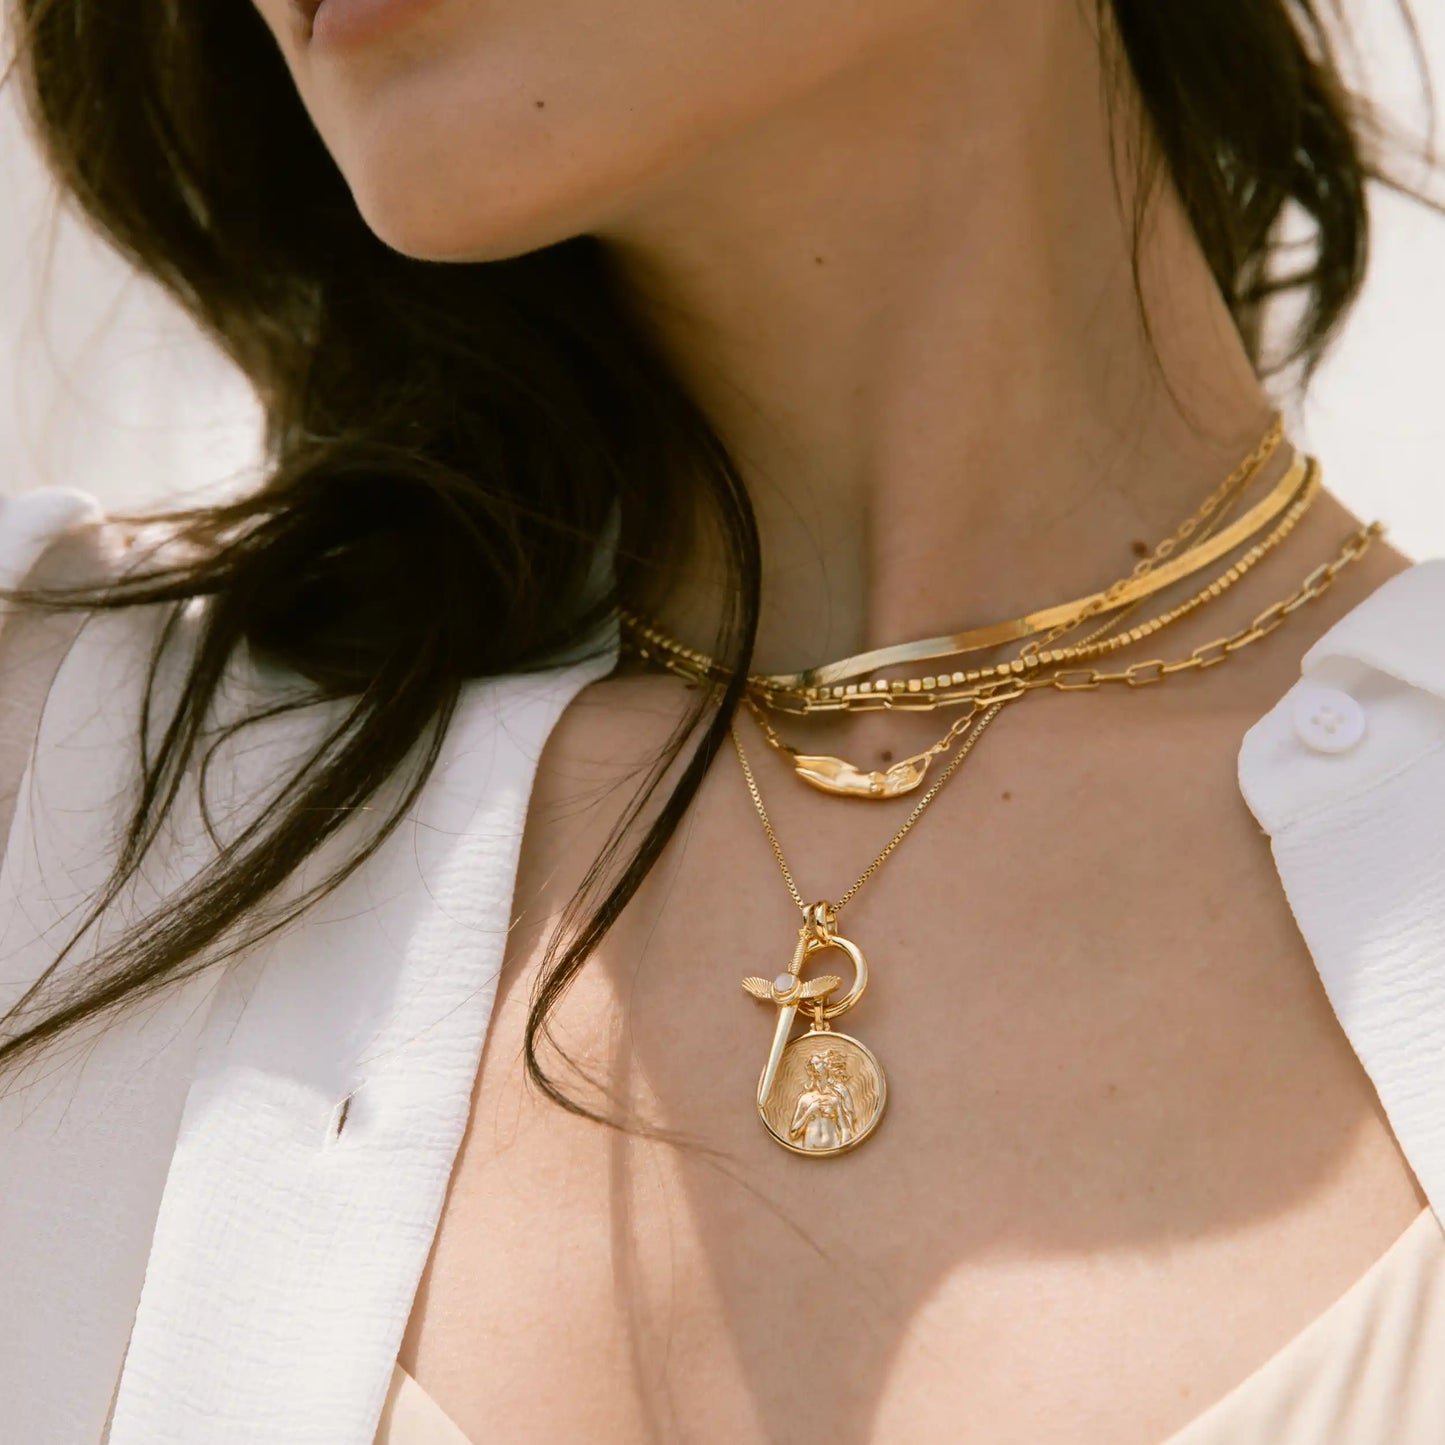 Aphrodite Necklace by Awe Inspired